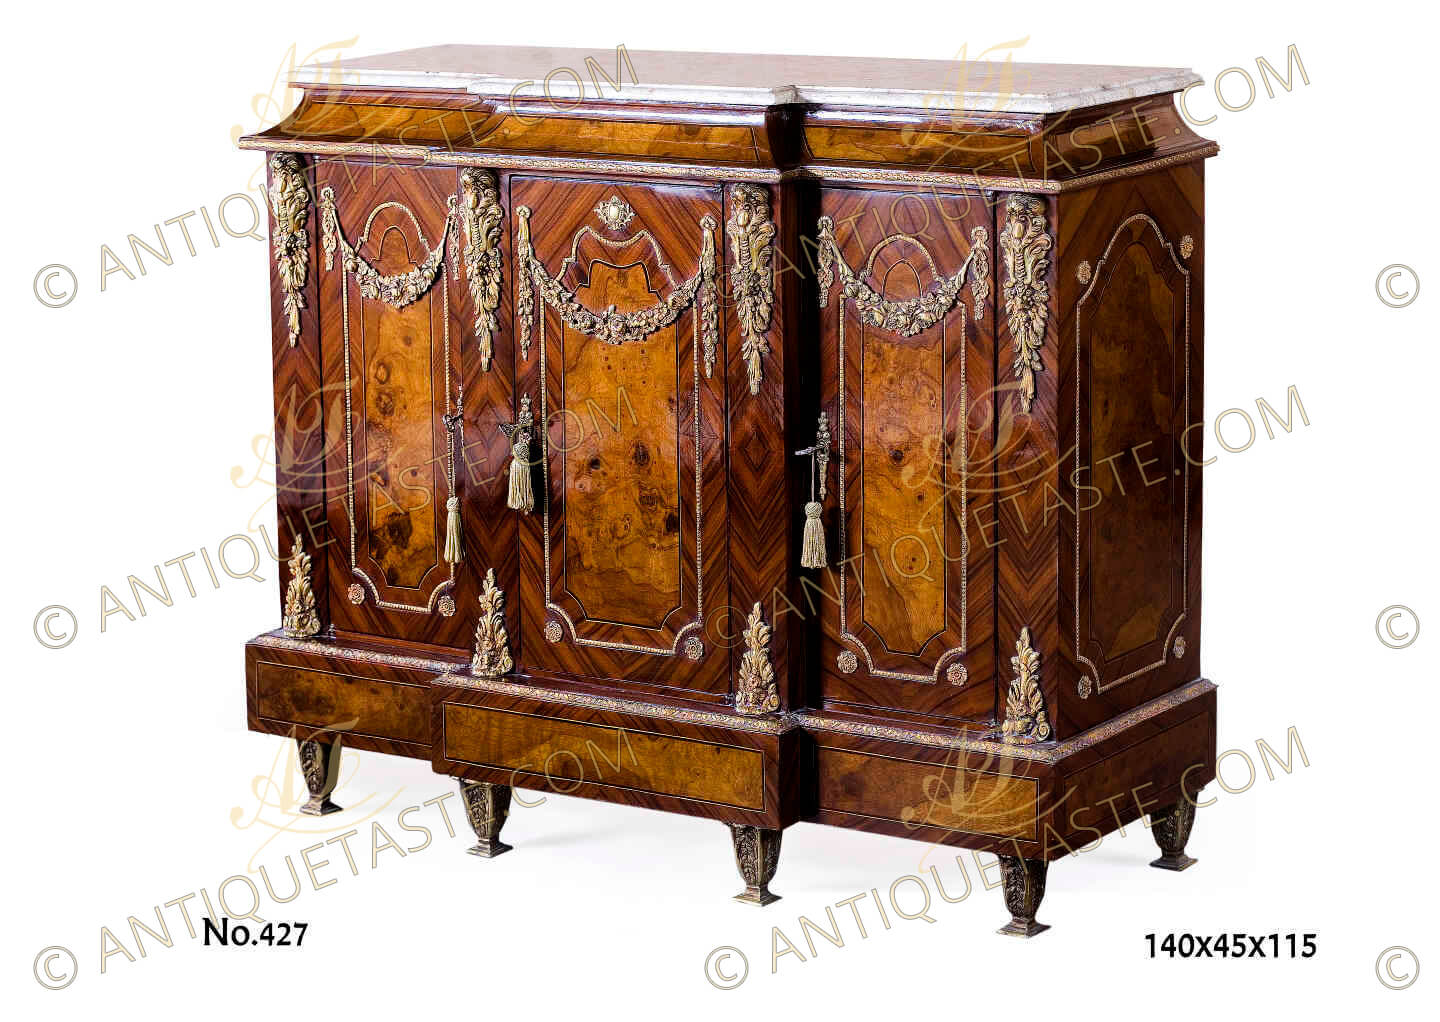 A most elegant late 19th century French Transitional style veneer inlaid three doors meuble à hauteur d'appui , The breakfront moulded marble top above a conforming mahogany veneer inlaid and filet bordered breakfront concave apron with a hammered ormolu band above three doors, the central door elegantly protrudes forward with a central ormolu cabochon amidst the other two doors, all doors quarter sans traverse palisander veneer inlaid, centered with mahogany veneer inlay within filet and ormolu beaded encadrement with flower rosettes, topped with  impressive blossoming swaging festoons and flanked with richly chased chutes ormolu mounts of acanthus, wreaths and imbricated foliage, the sides have the same design, All above a breakfront veneer inlaid protrusive plinth topped with a Cyma Recta style ormolu trim on ormolu leafy tapering feet